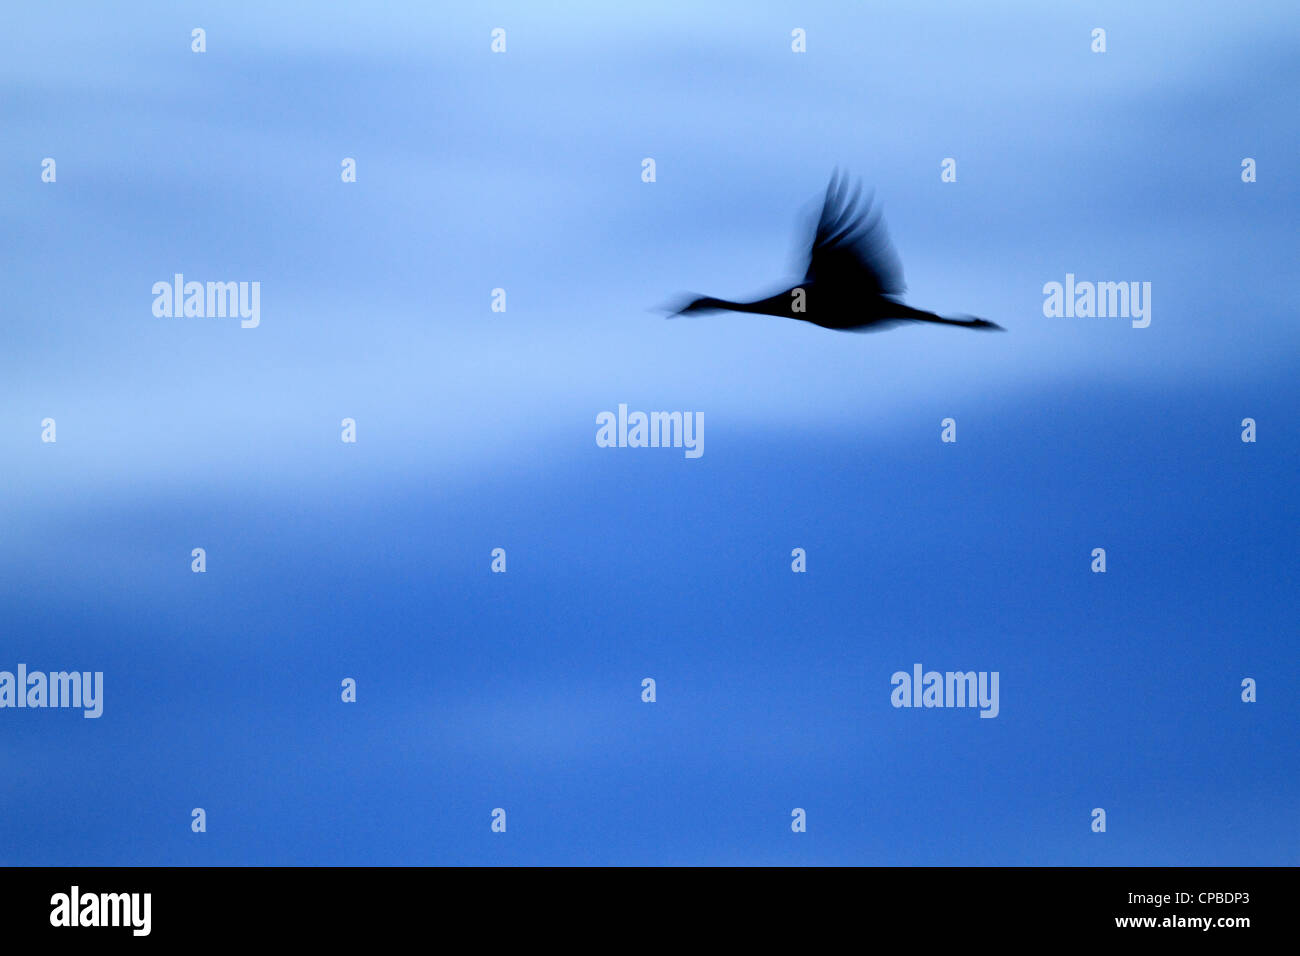 Abstract image of a Common Crane (Grus grus) in flight against the morning sky Stock Photo